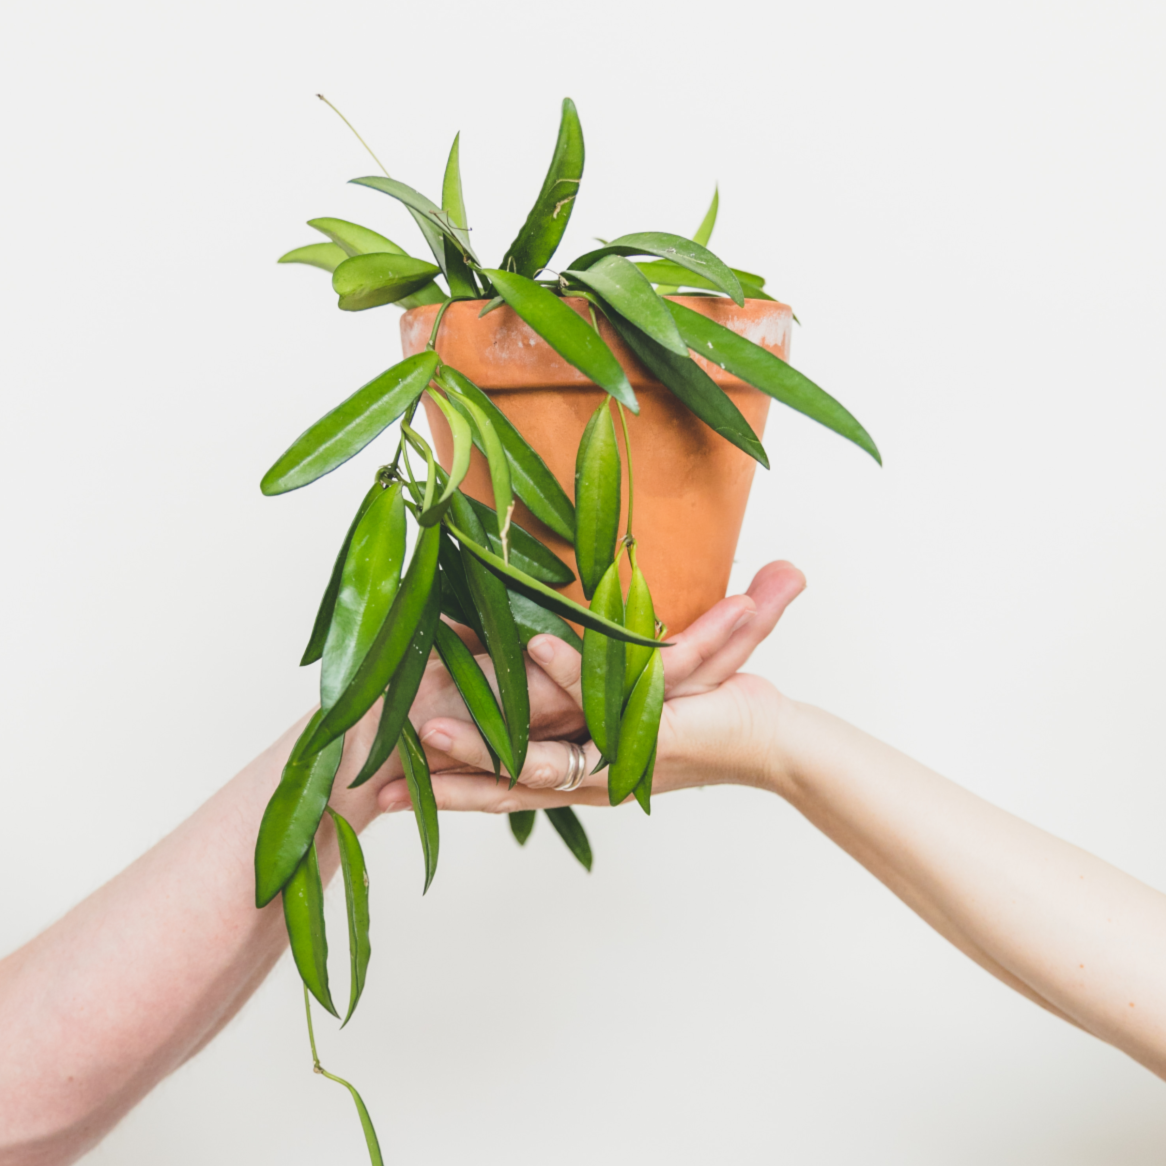 Learn all about terracotta pots including pros/cons and what plants can be housed in them - Clever Bloom #terracotta #plantlady #houseplants #plants